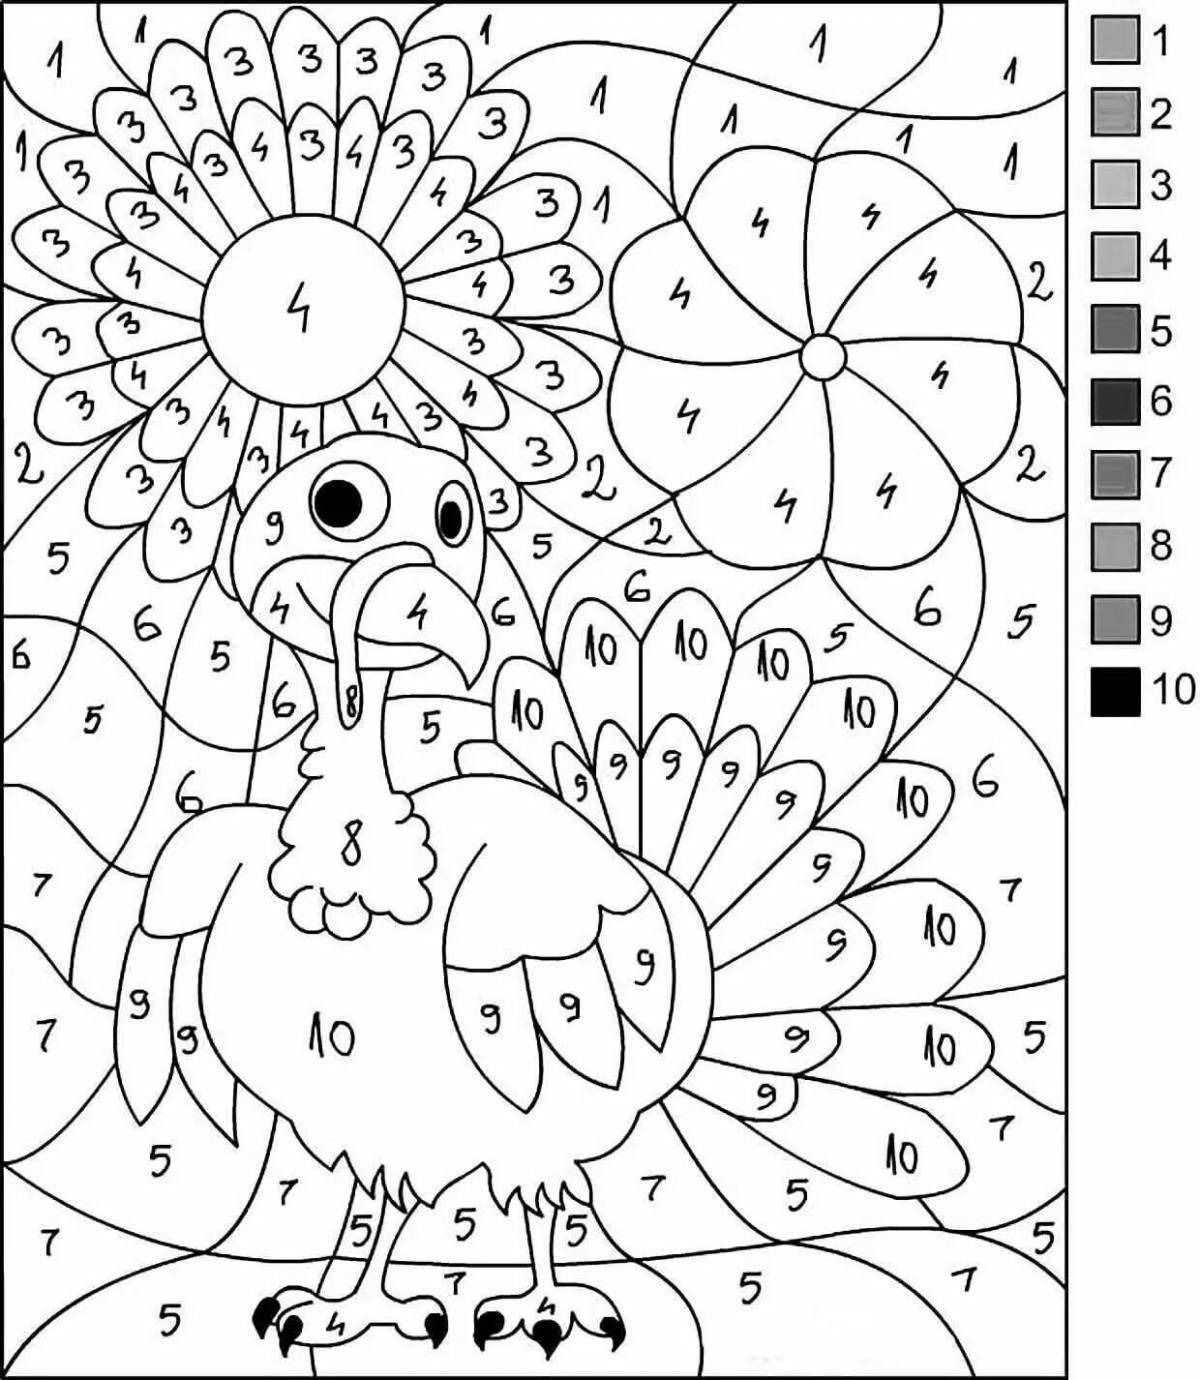 Color-lush coloring page digital for children 7 years old